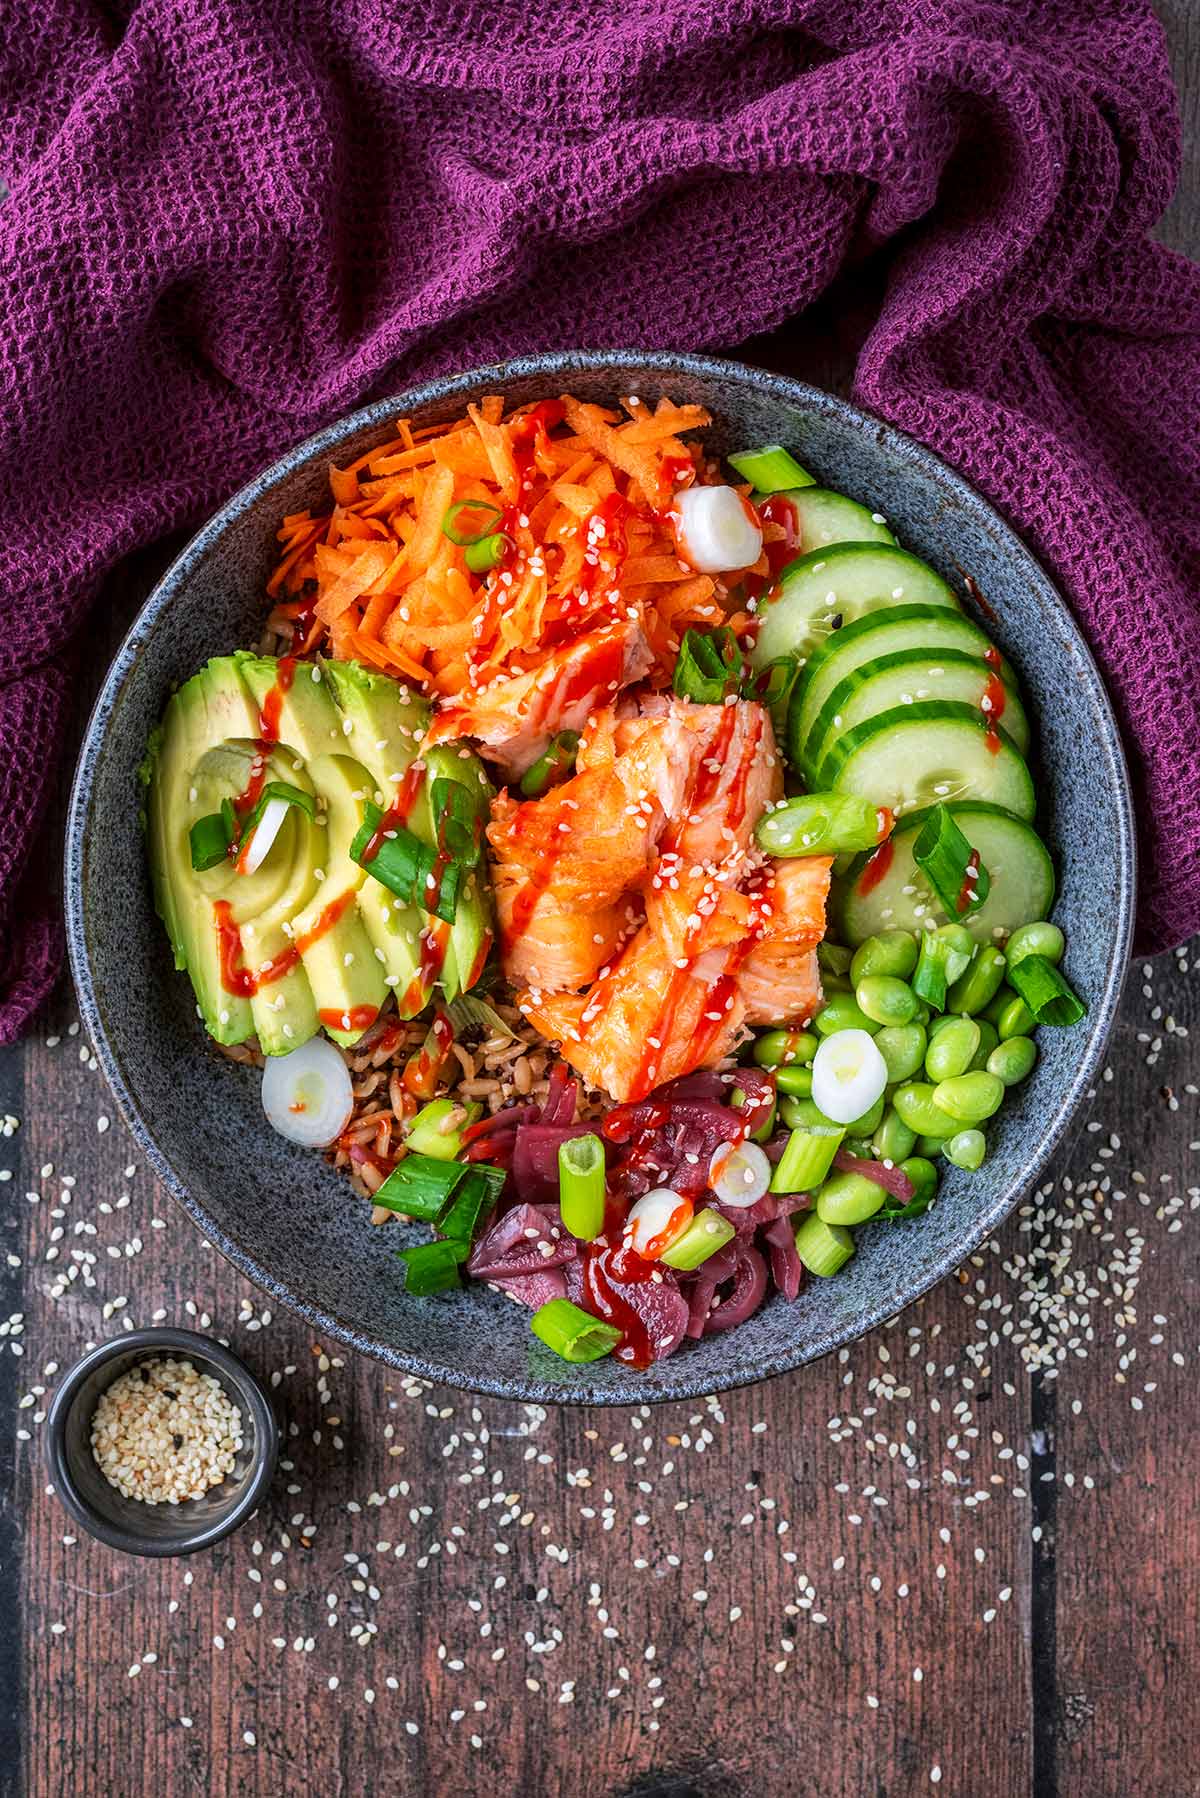 A large bowl of rice, salmon and salad vegetables.